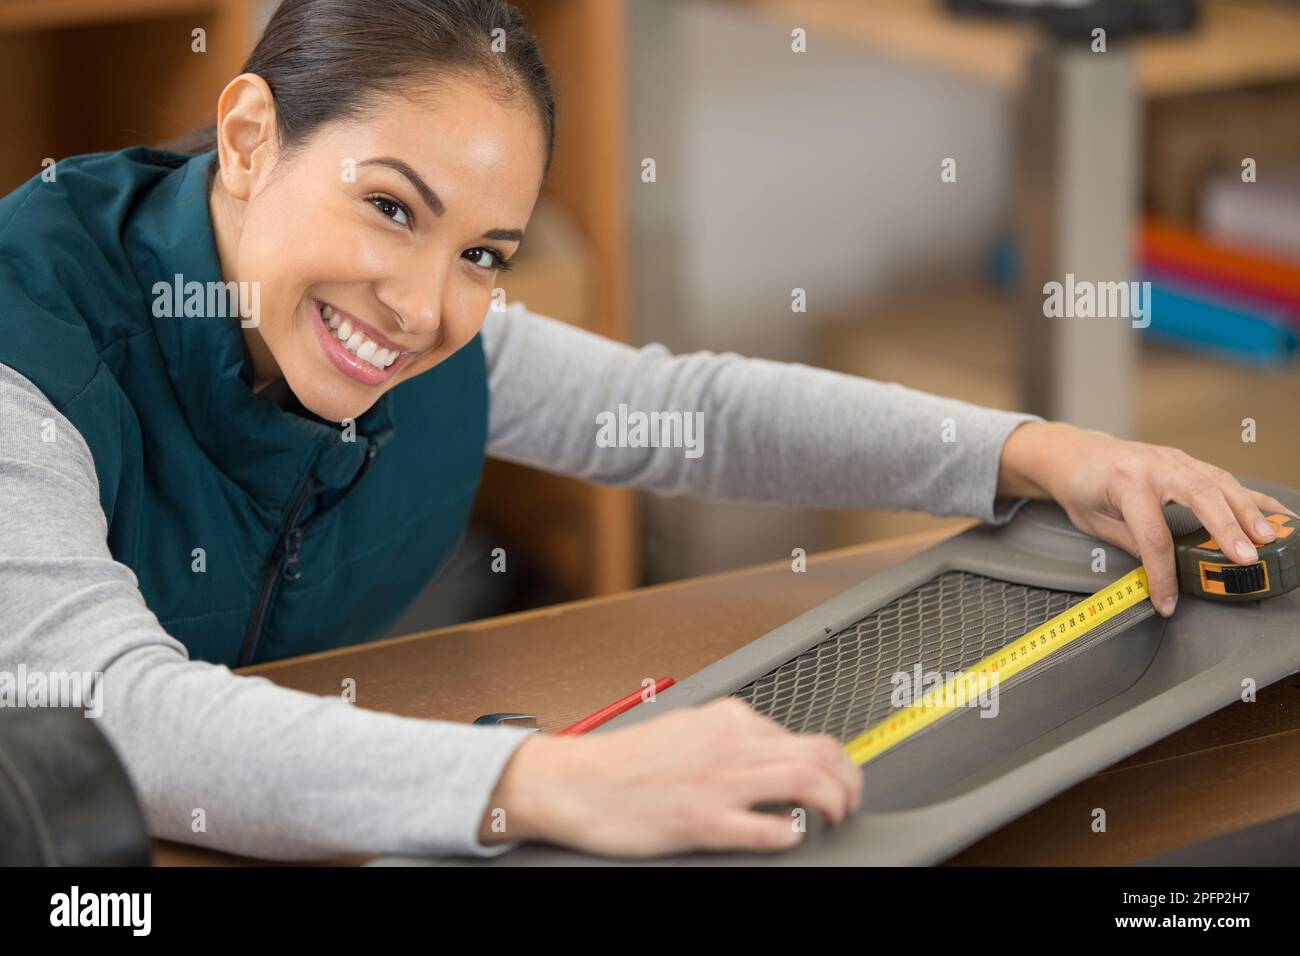 woman measuring a car part in a workshop Stock Photo